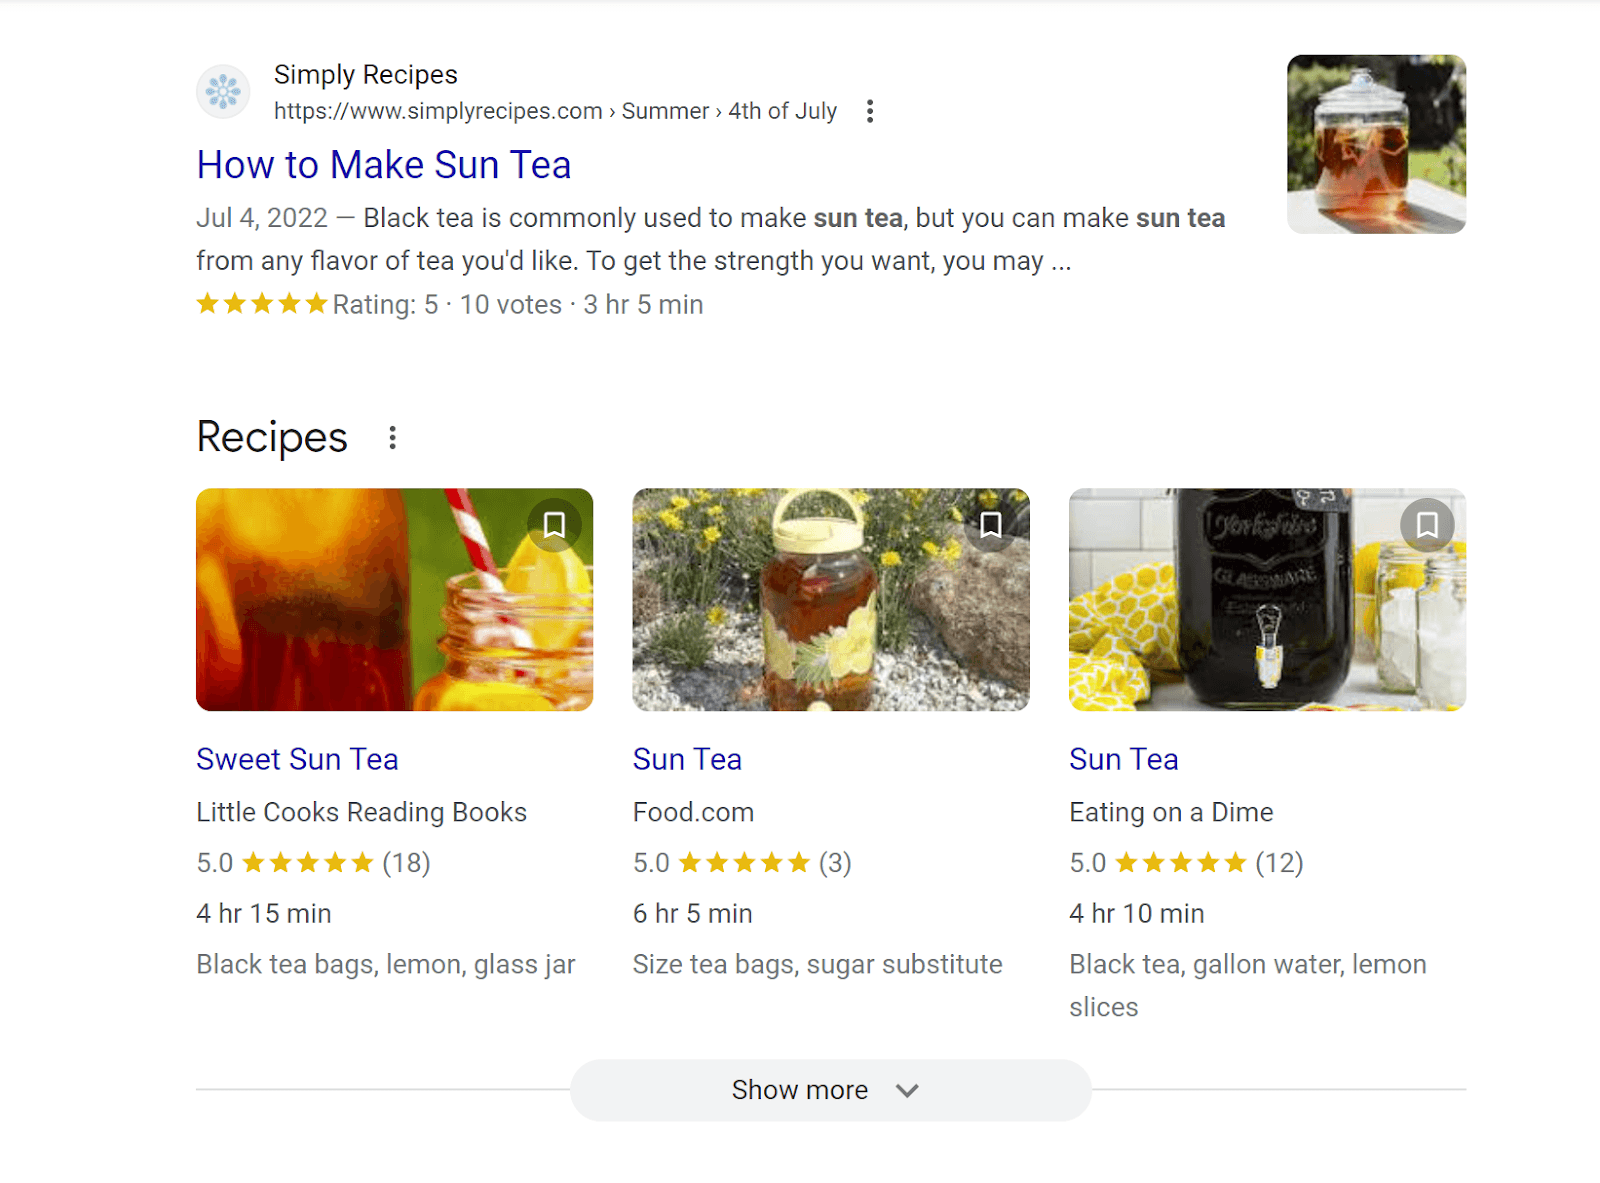 SERP result with recipes for sun tea